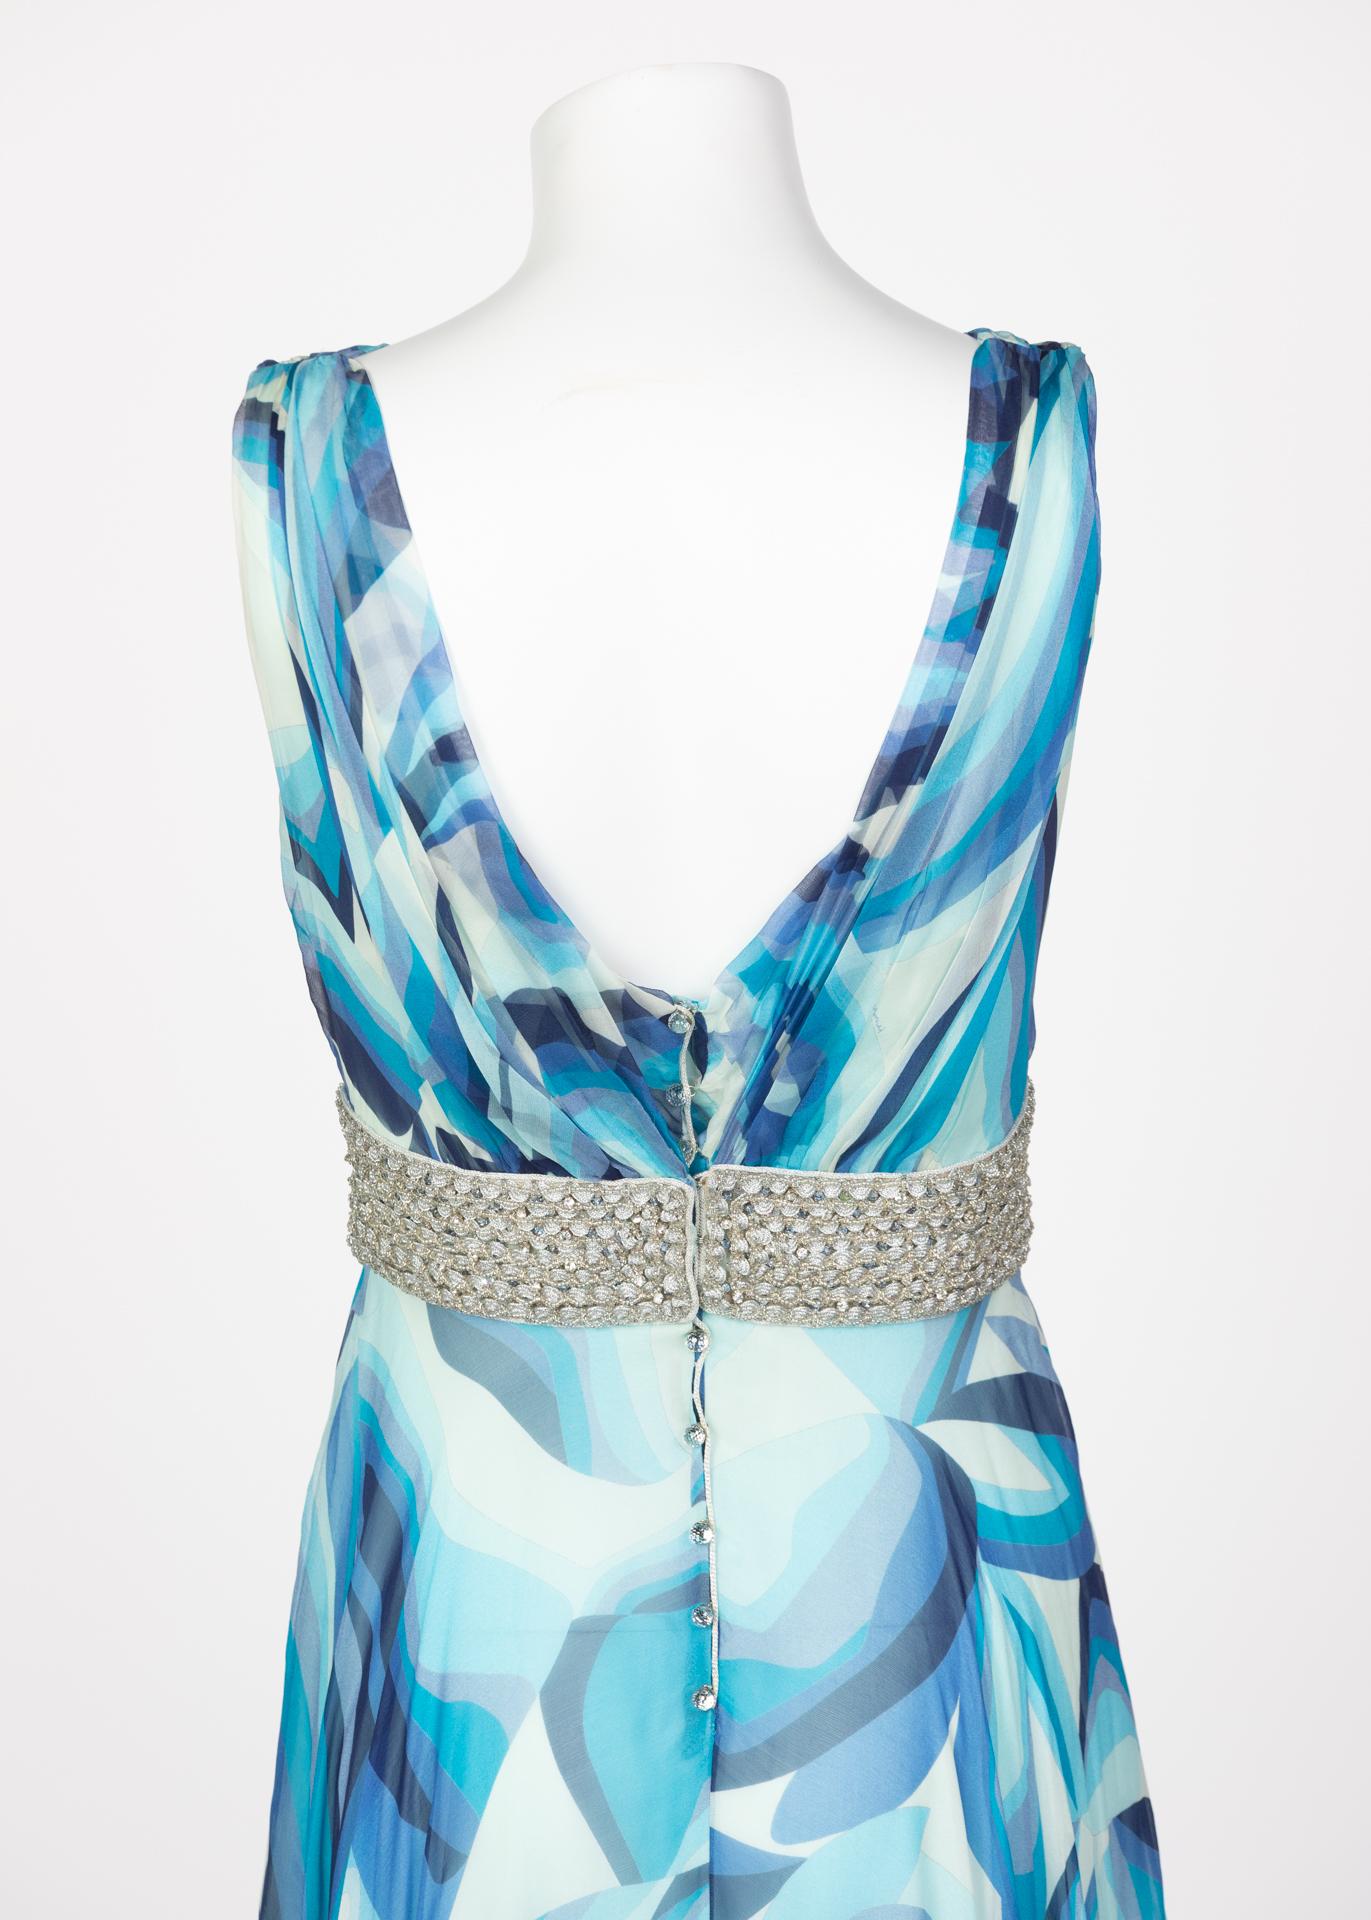 Missoni Blue Printed Plunge Neck Sleeveless Silk Crystal Gown, 2006 7